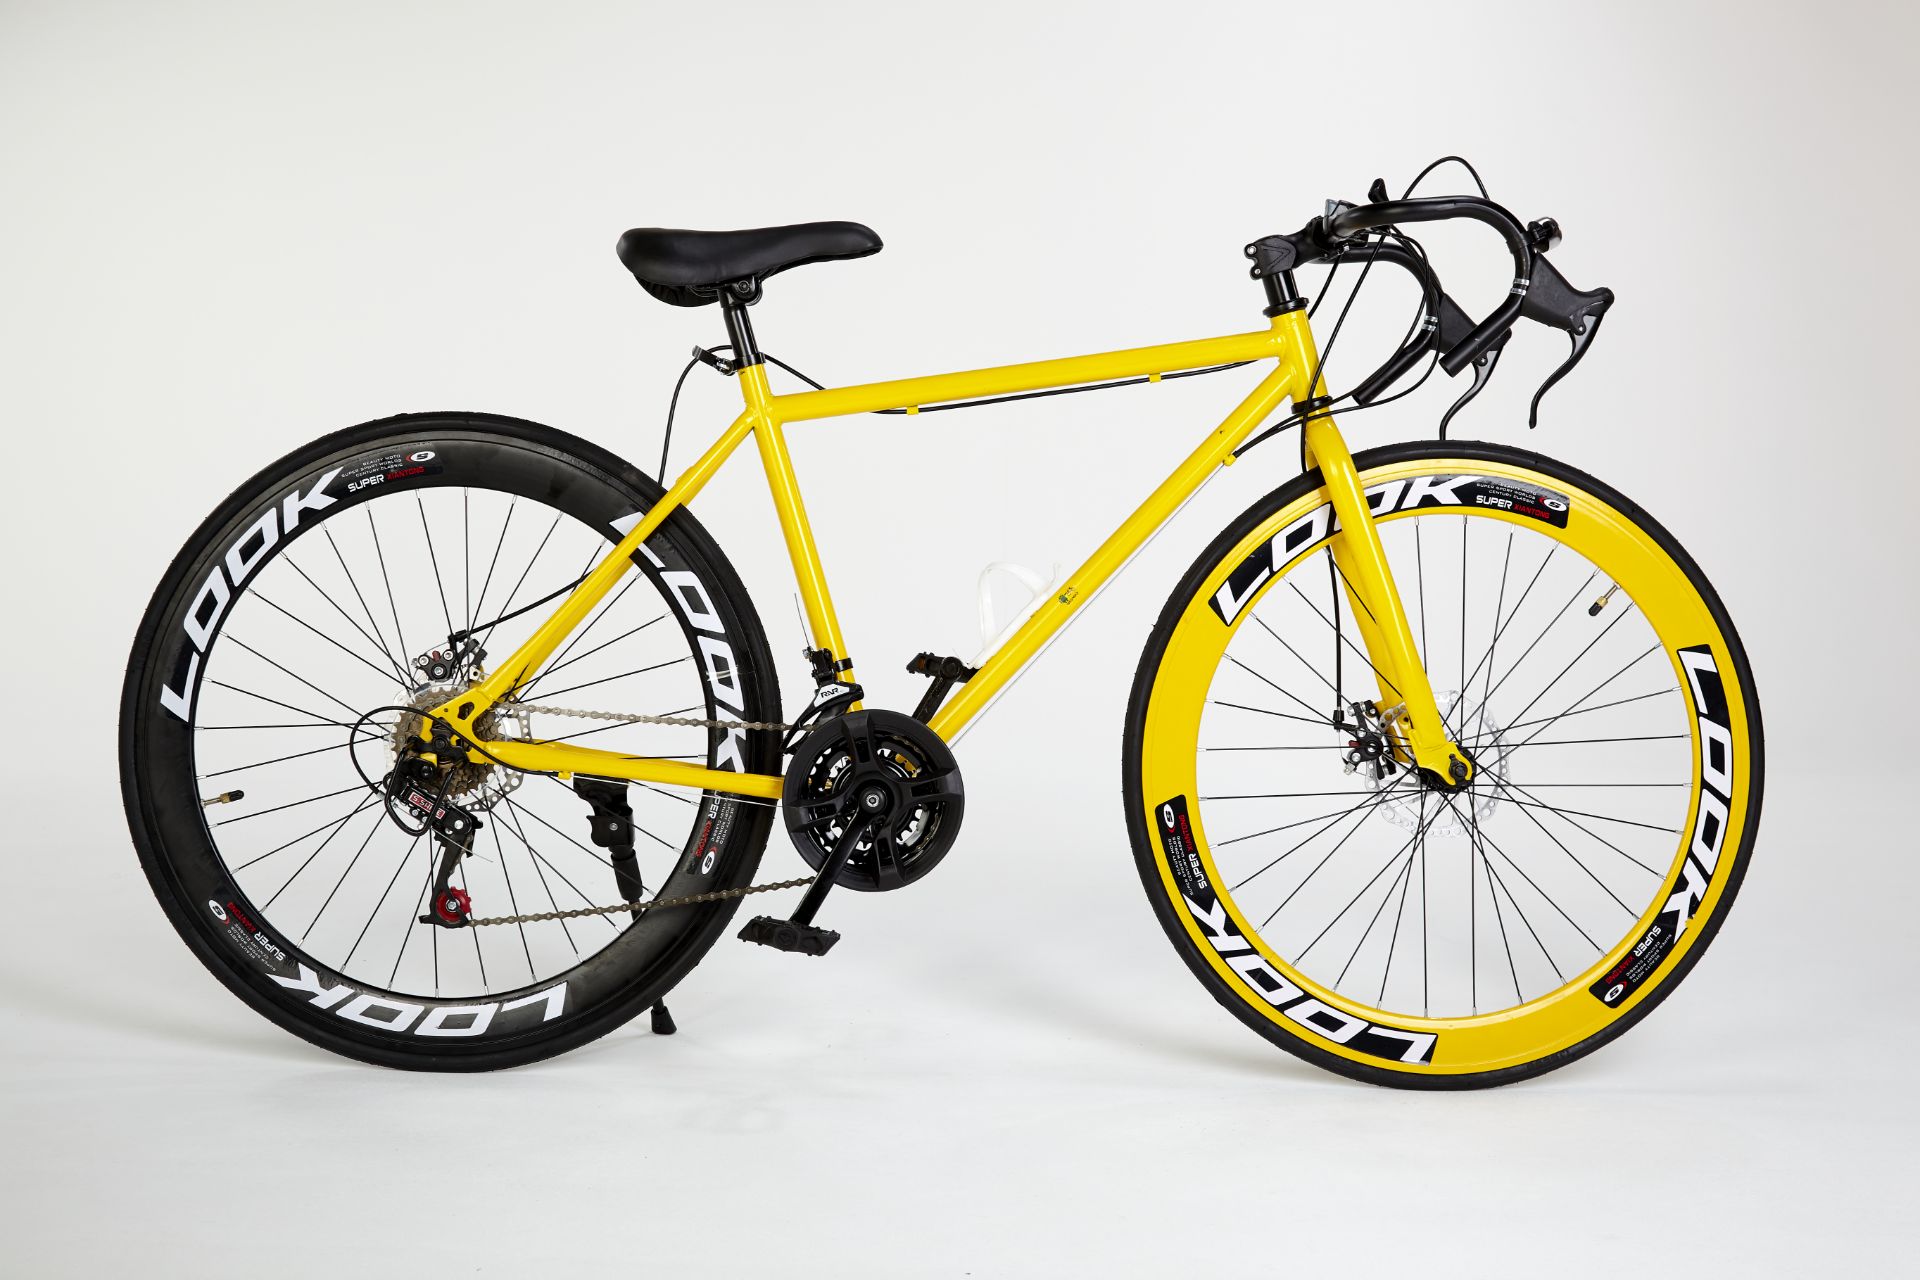 YELLOW STREET BIKE WITH 21 GREAR, BRAKE DISKS, KICK STAND, COOL THIN TYRES - Image 2 of 12